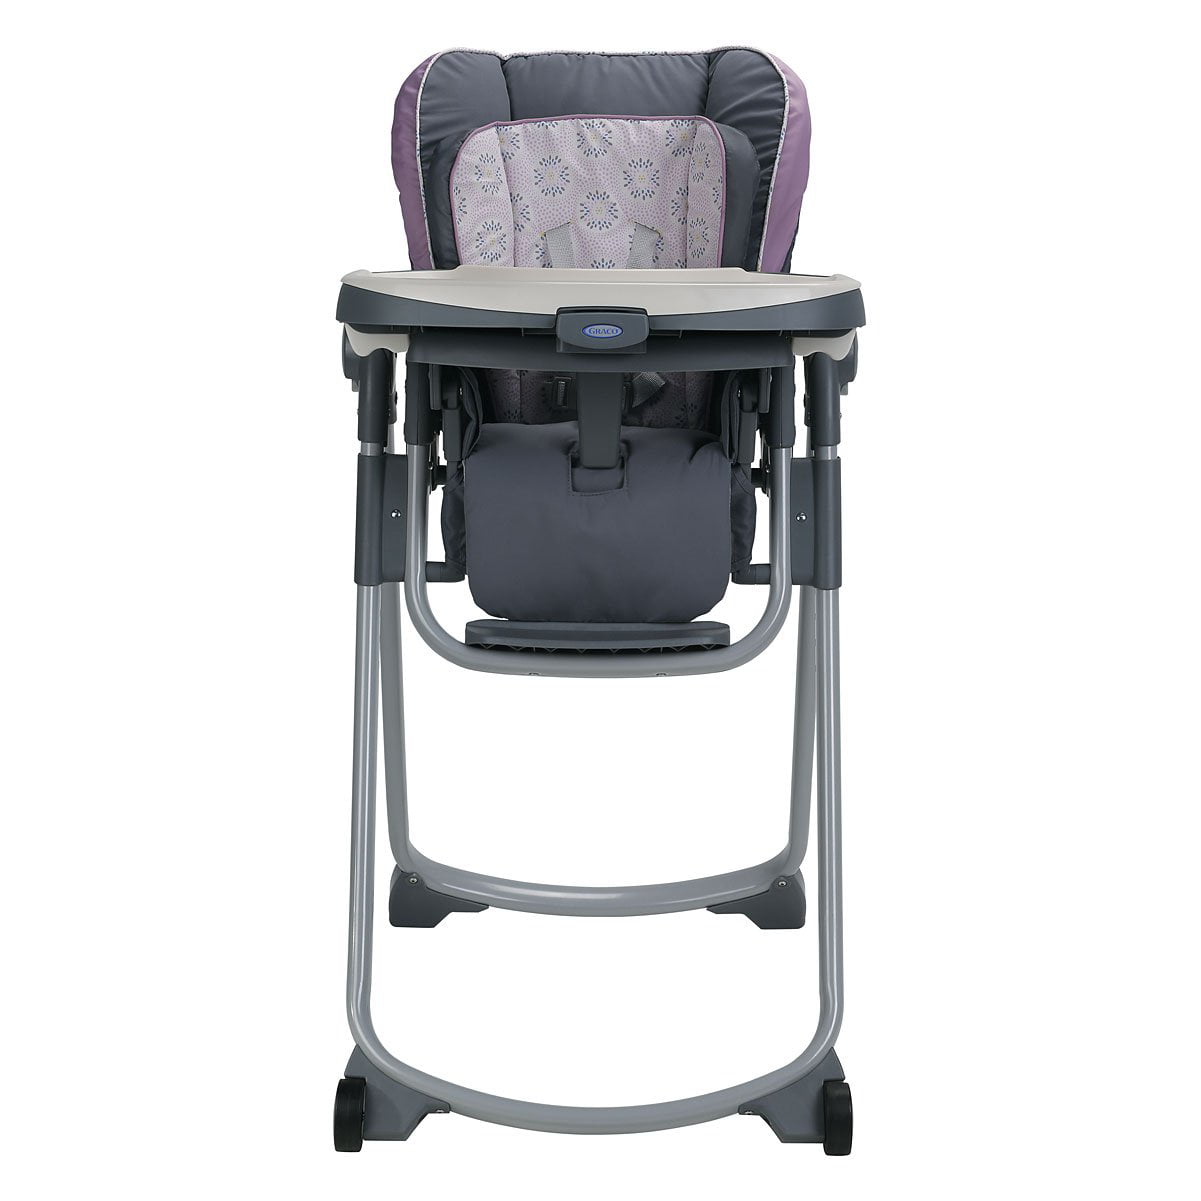 Graco Slim Spaces Compact Adjustable Baby Toddler Feeding